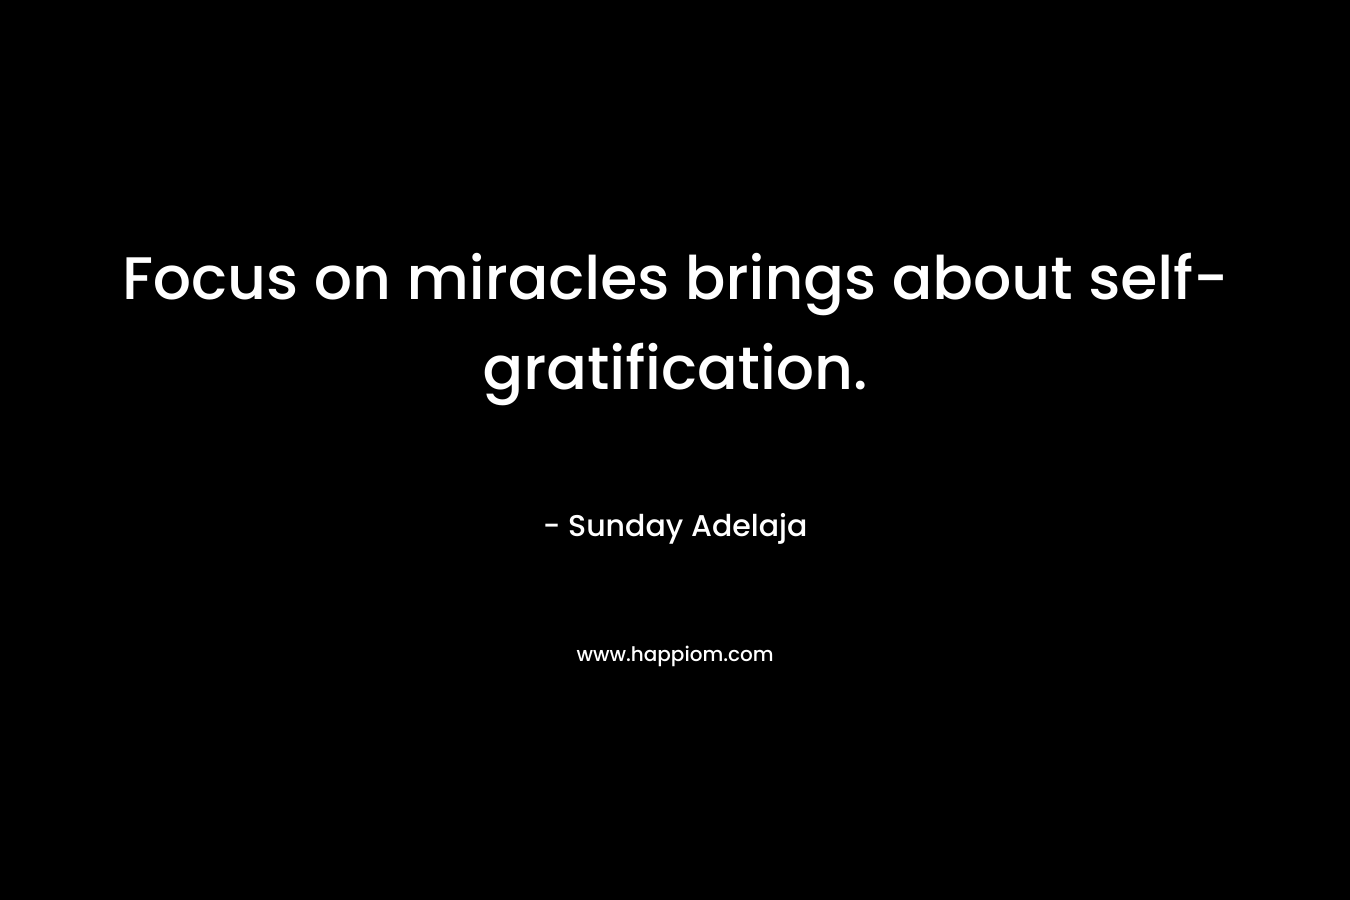 Focus on miracles brings about self-gratification.